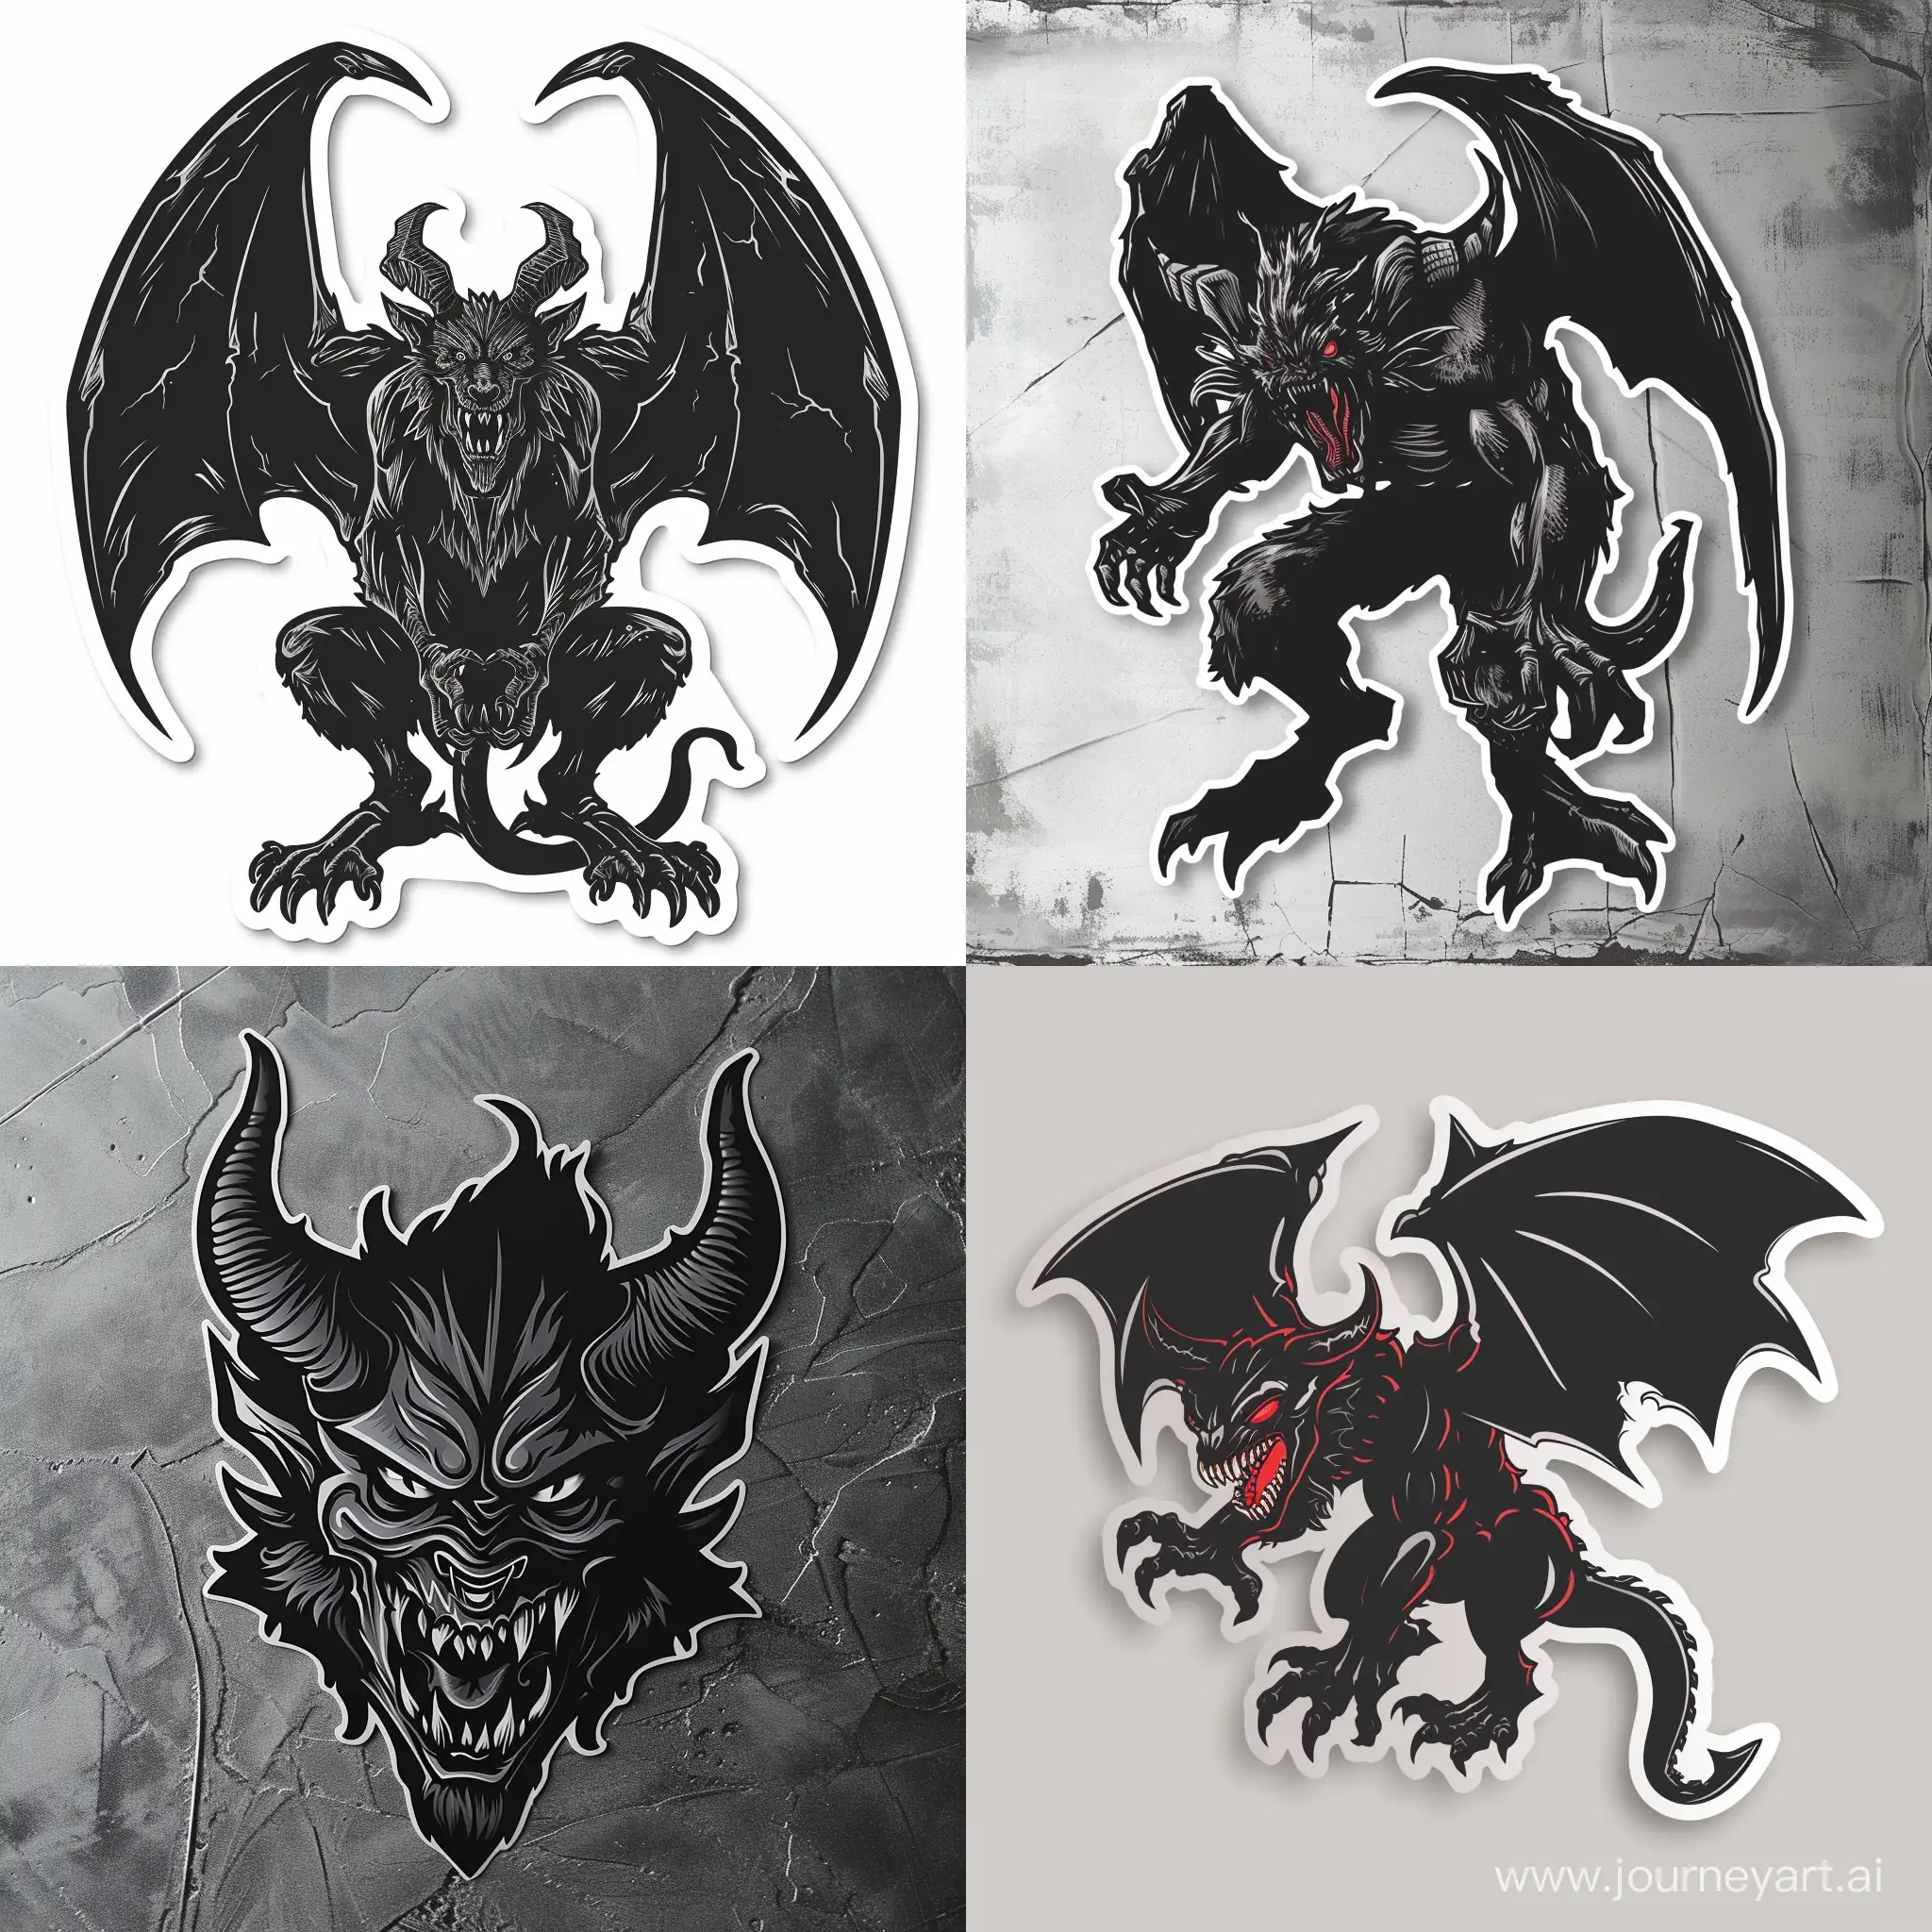 sticker with a black demon in Gothic style